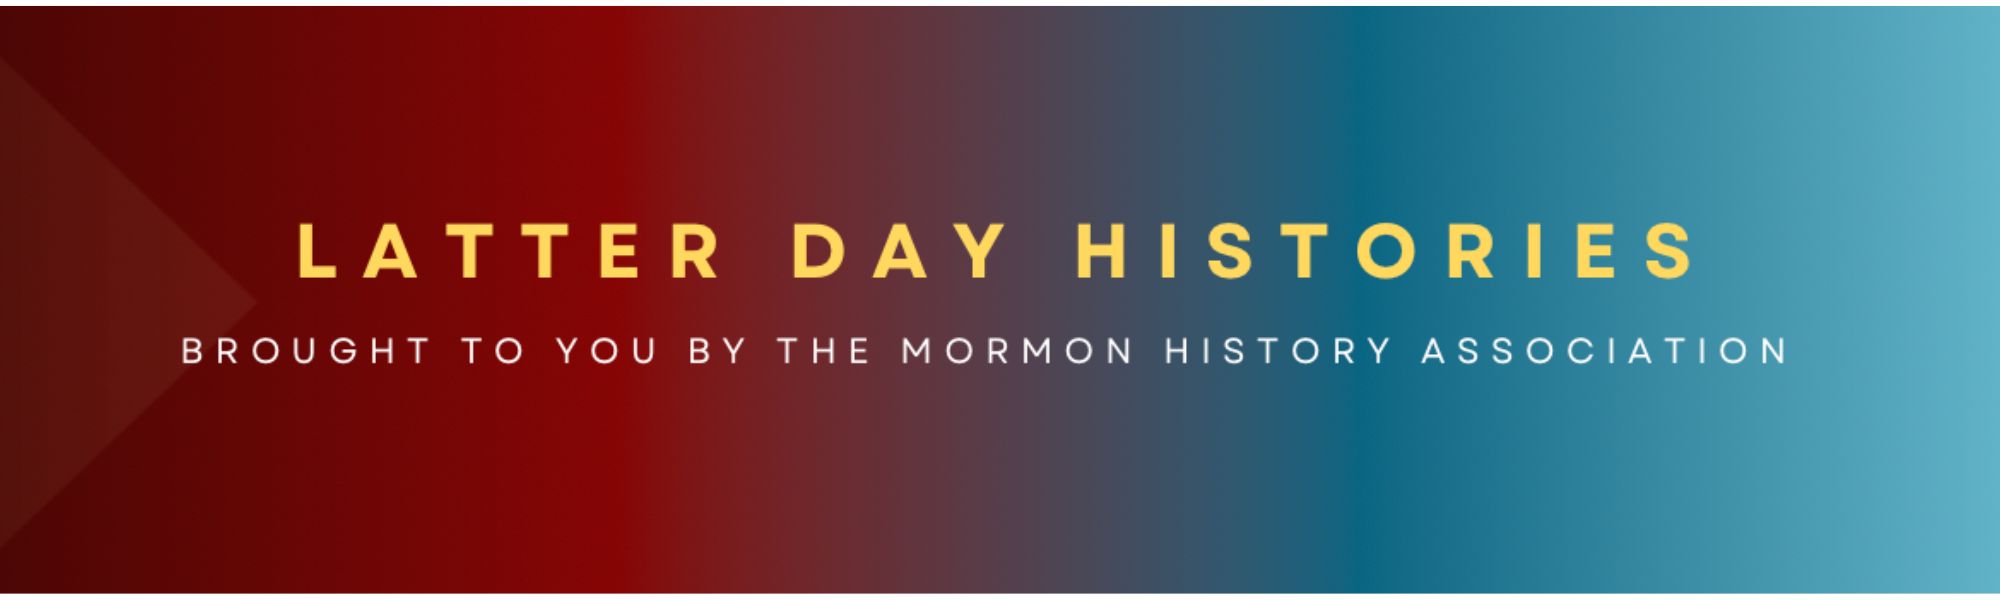 Latter Day Histories